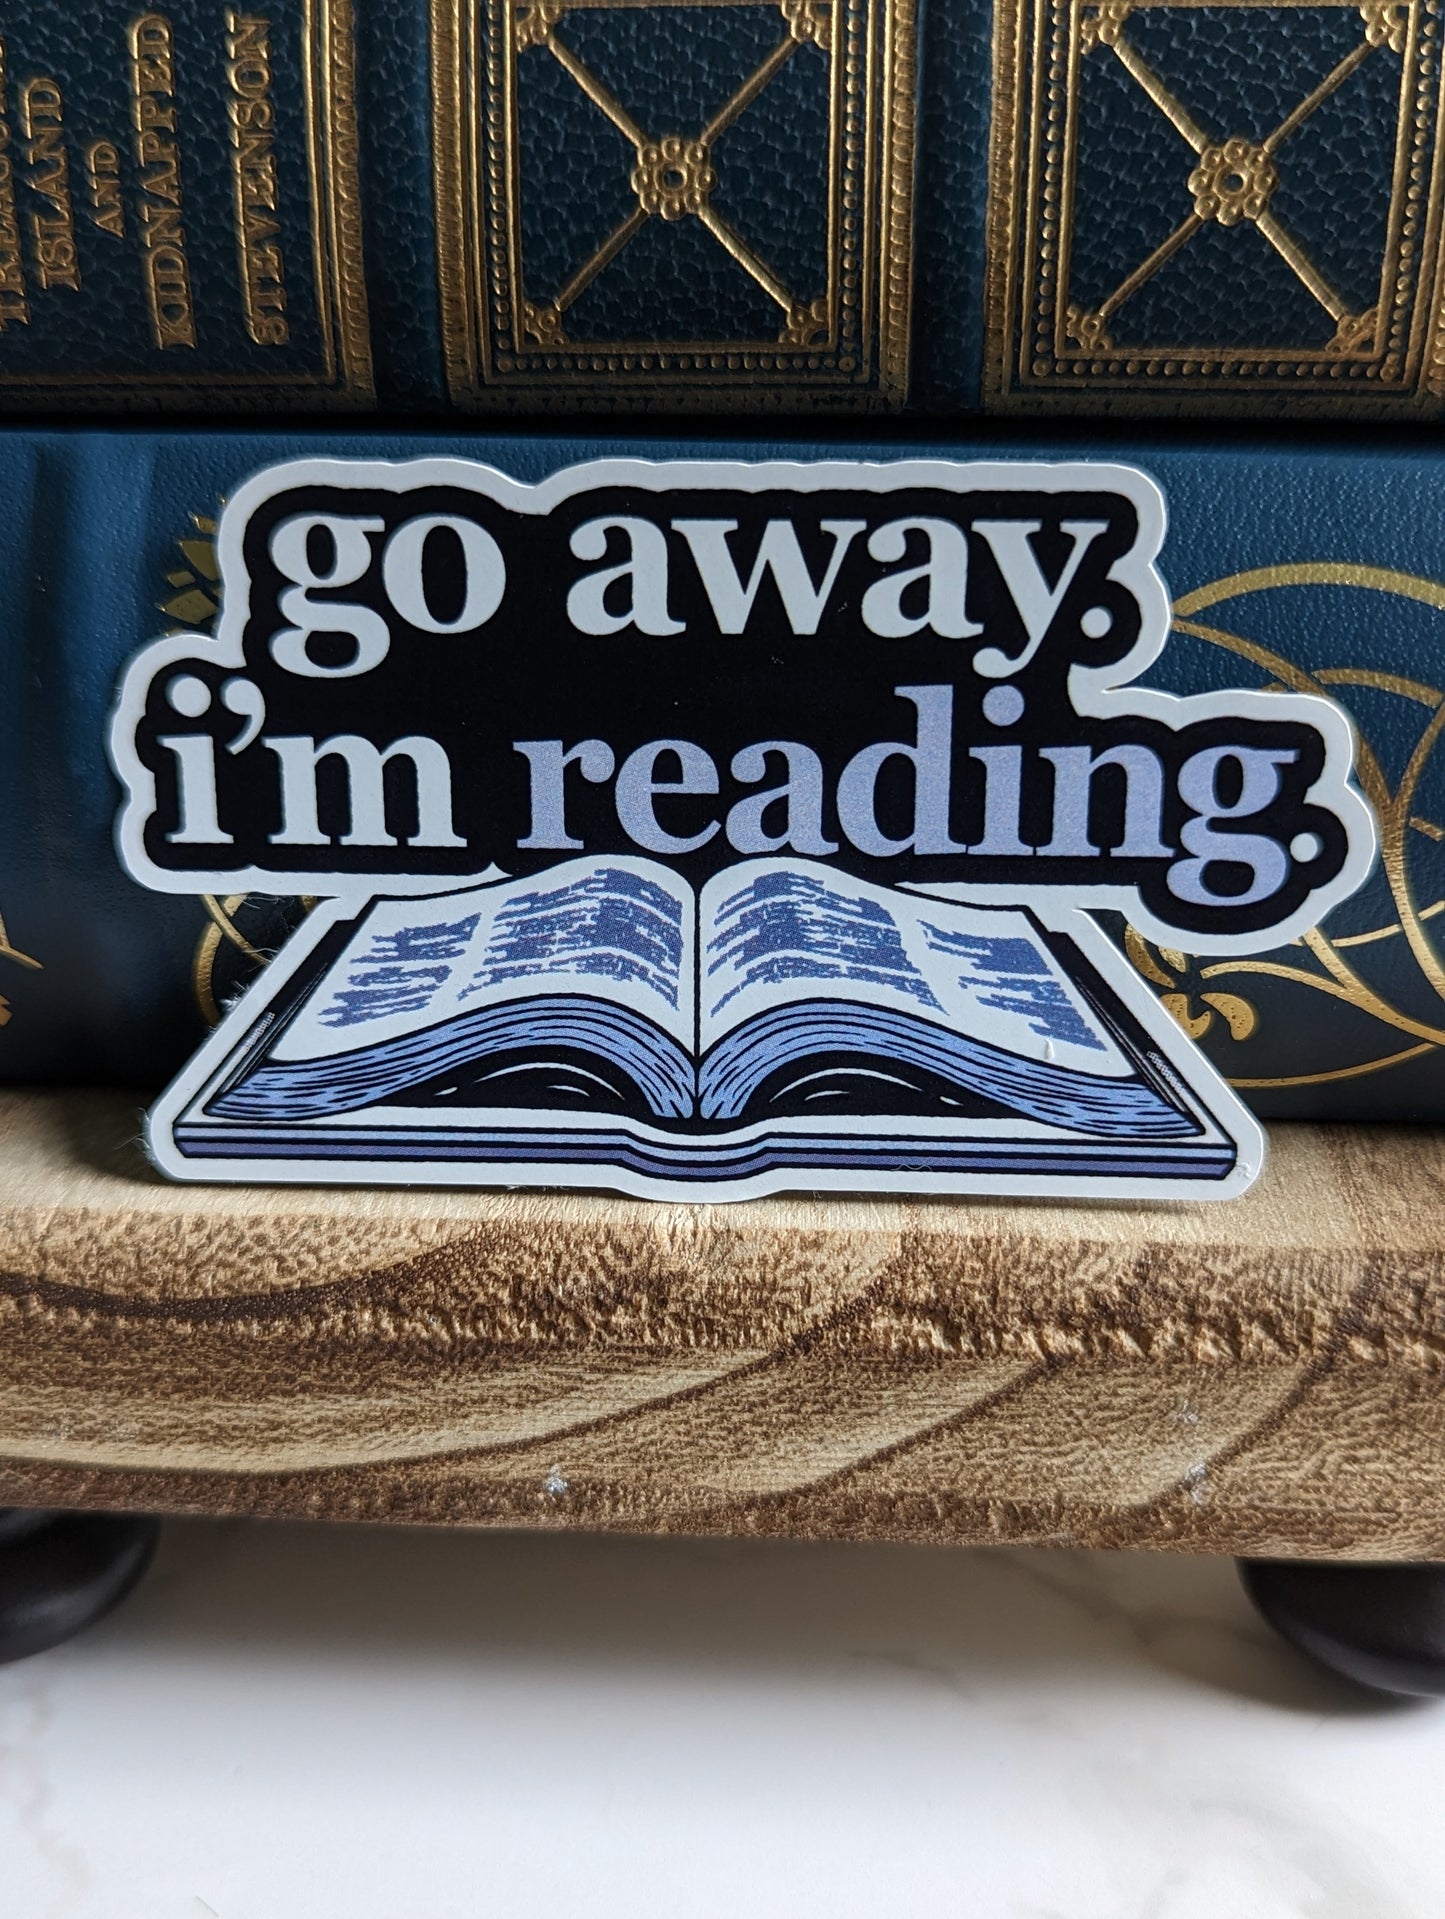 AA sticker with text on top that says "Go away. I'm reading" above an open book.